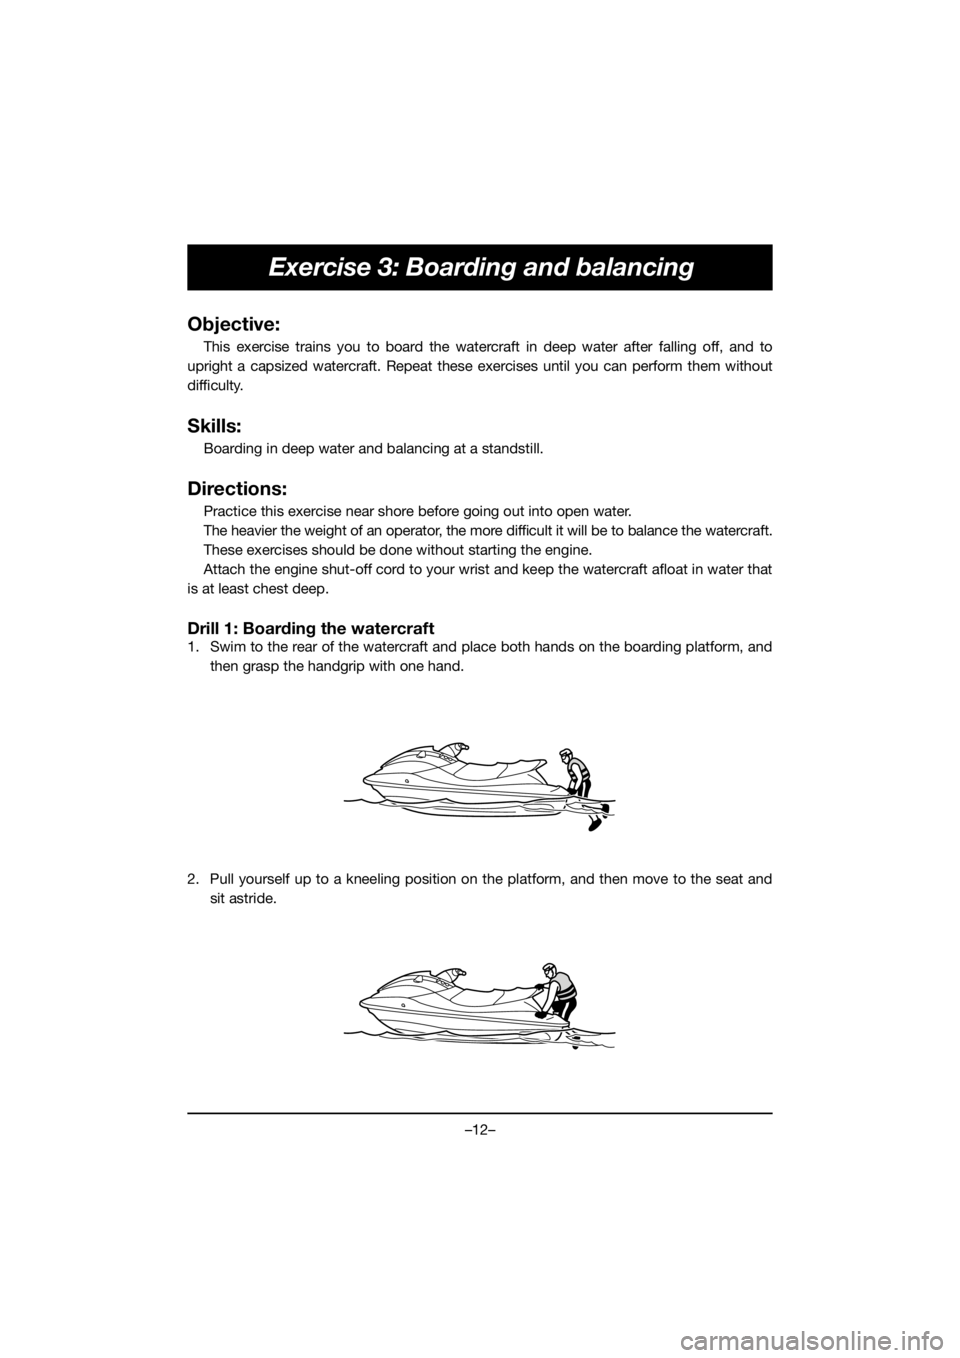 YAMAHA VX DELUXE 2021  Owners Manual –12–
Exercise 3: Boarding and balancing
Objective:
This exercise trains you to board the watercraft in deep water after falling off, and to
upright a capsized watercraft. Repeat these exercises un